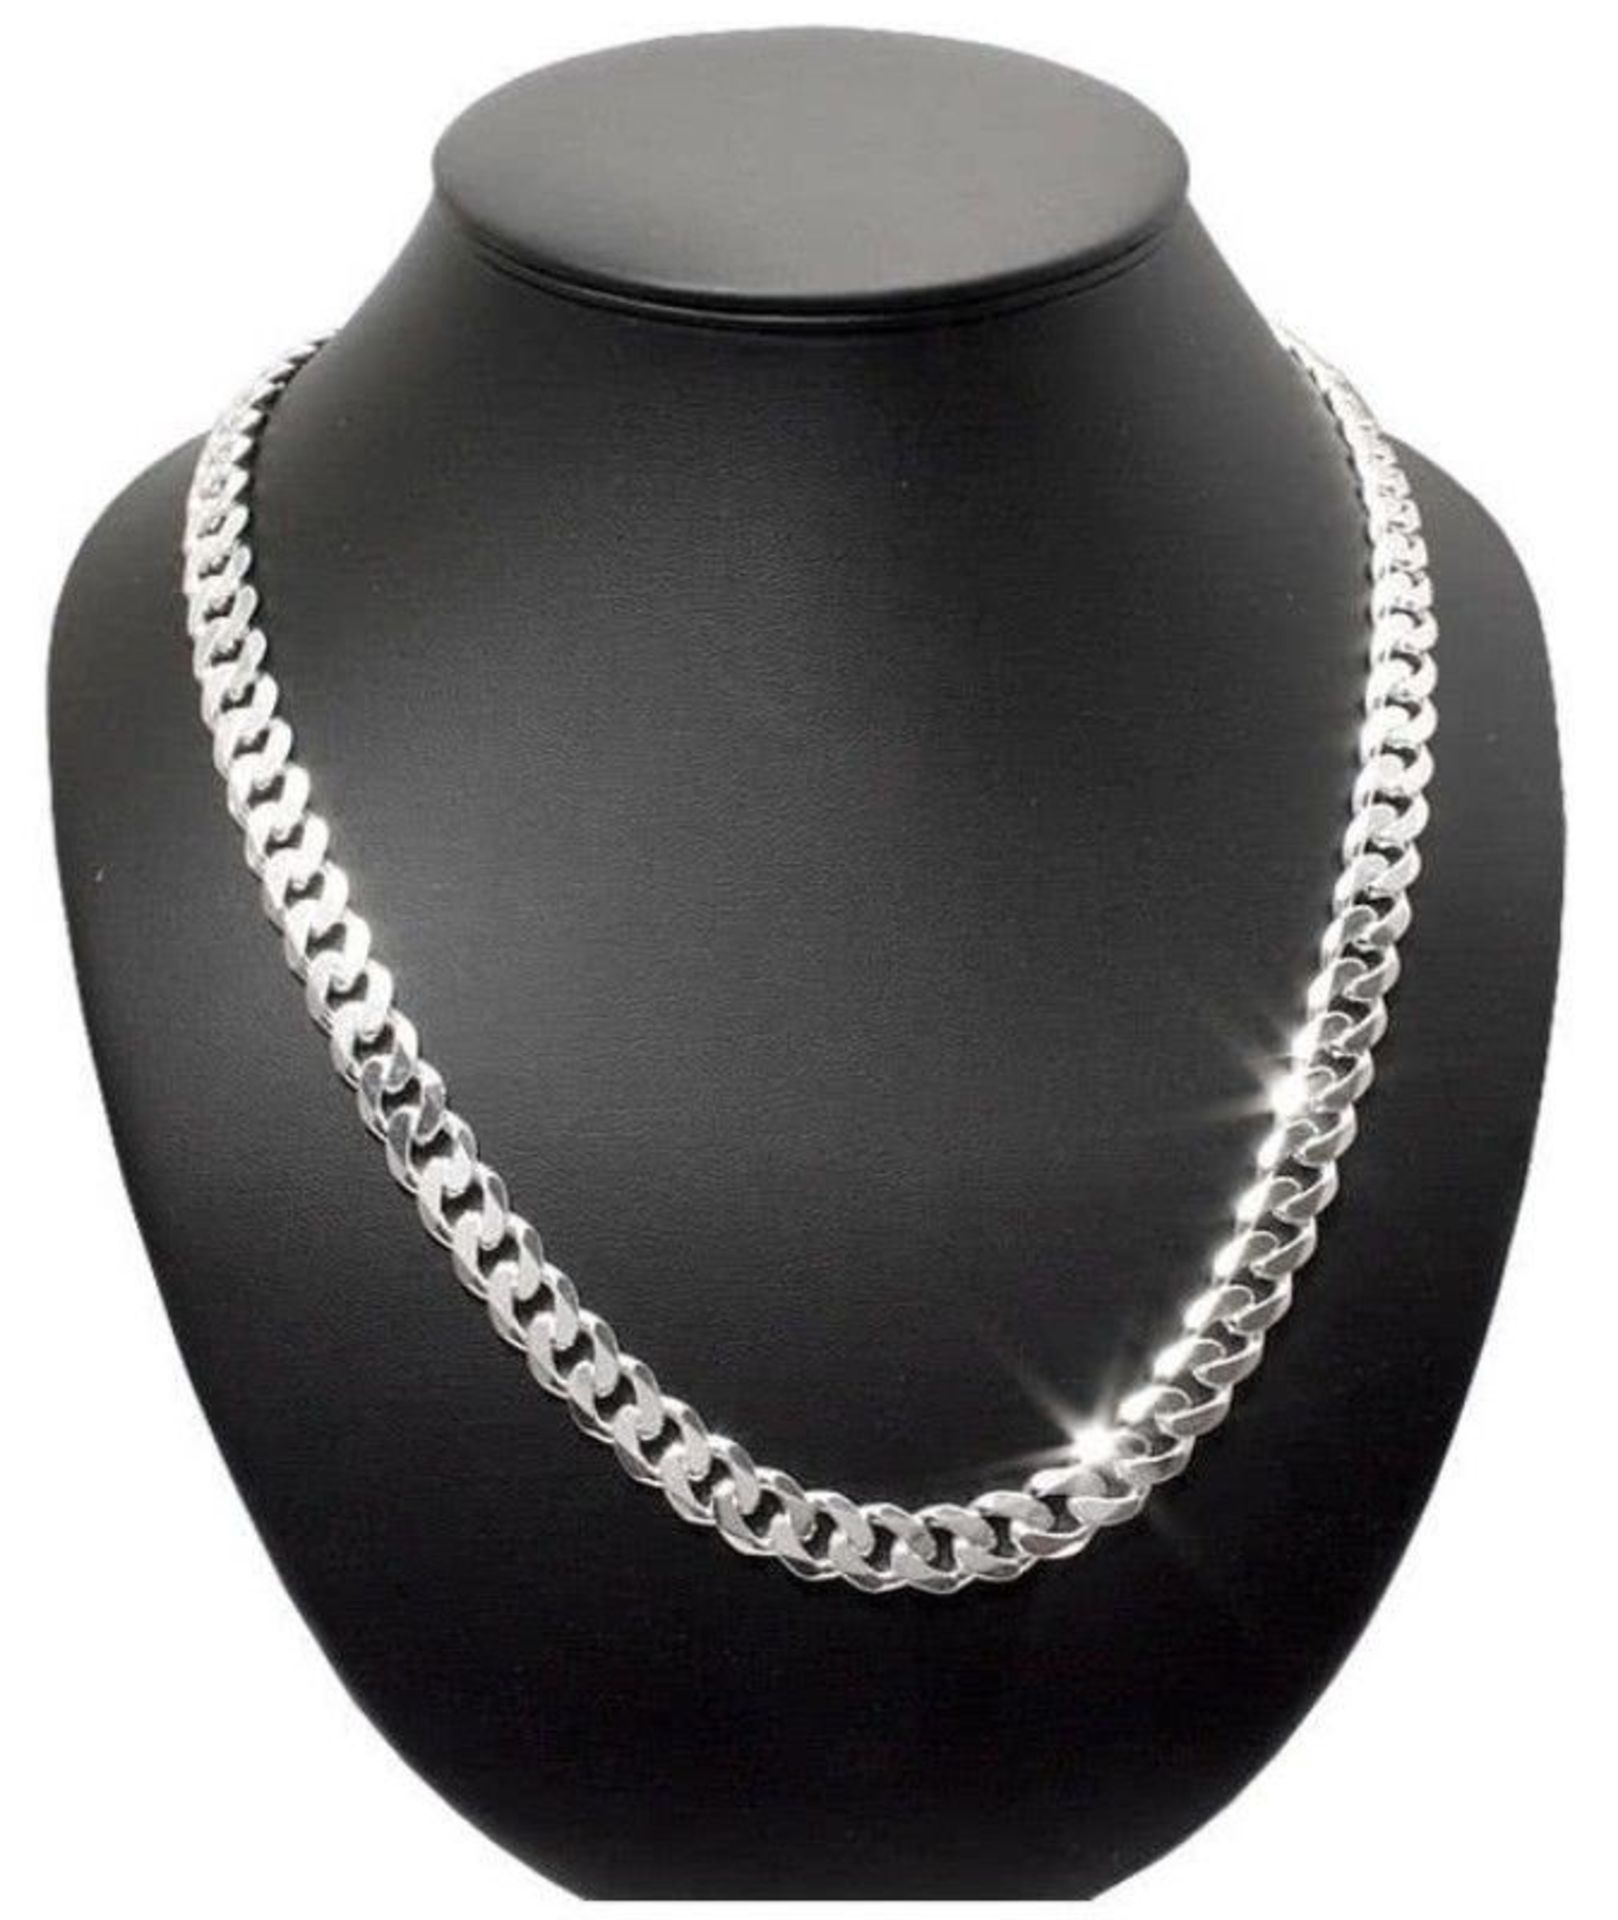 7mm Men's Curb Cuban Link Chain Necklace Pendant 925 Sterling Silver 48 GR 24 inch - 60cm - Image 6 of 7